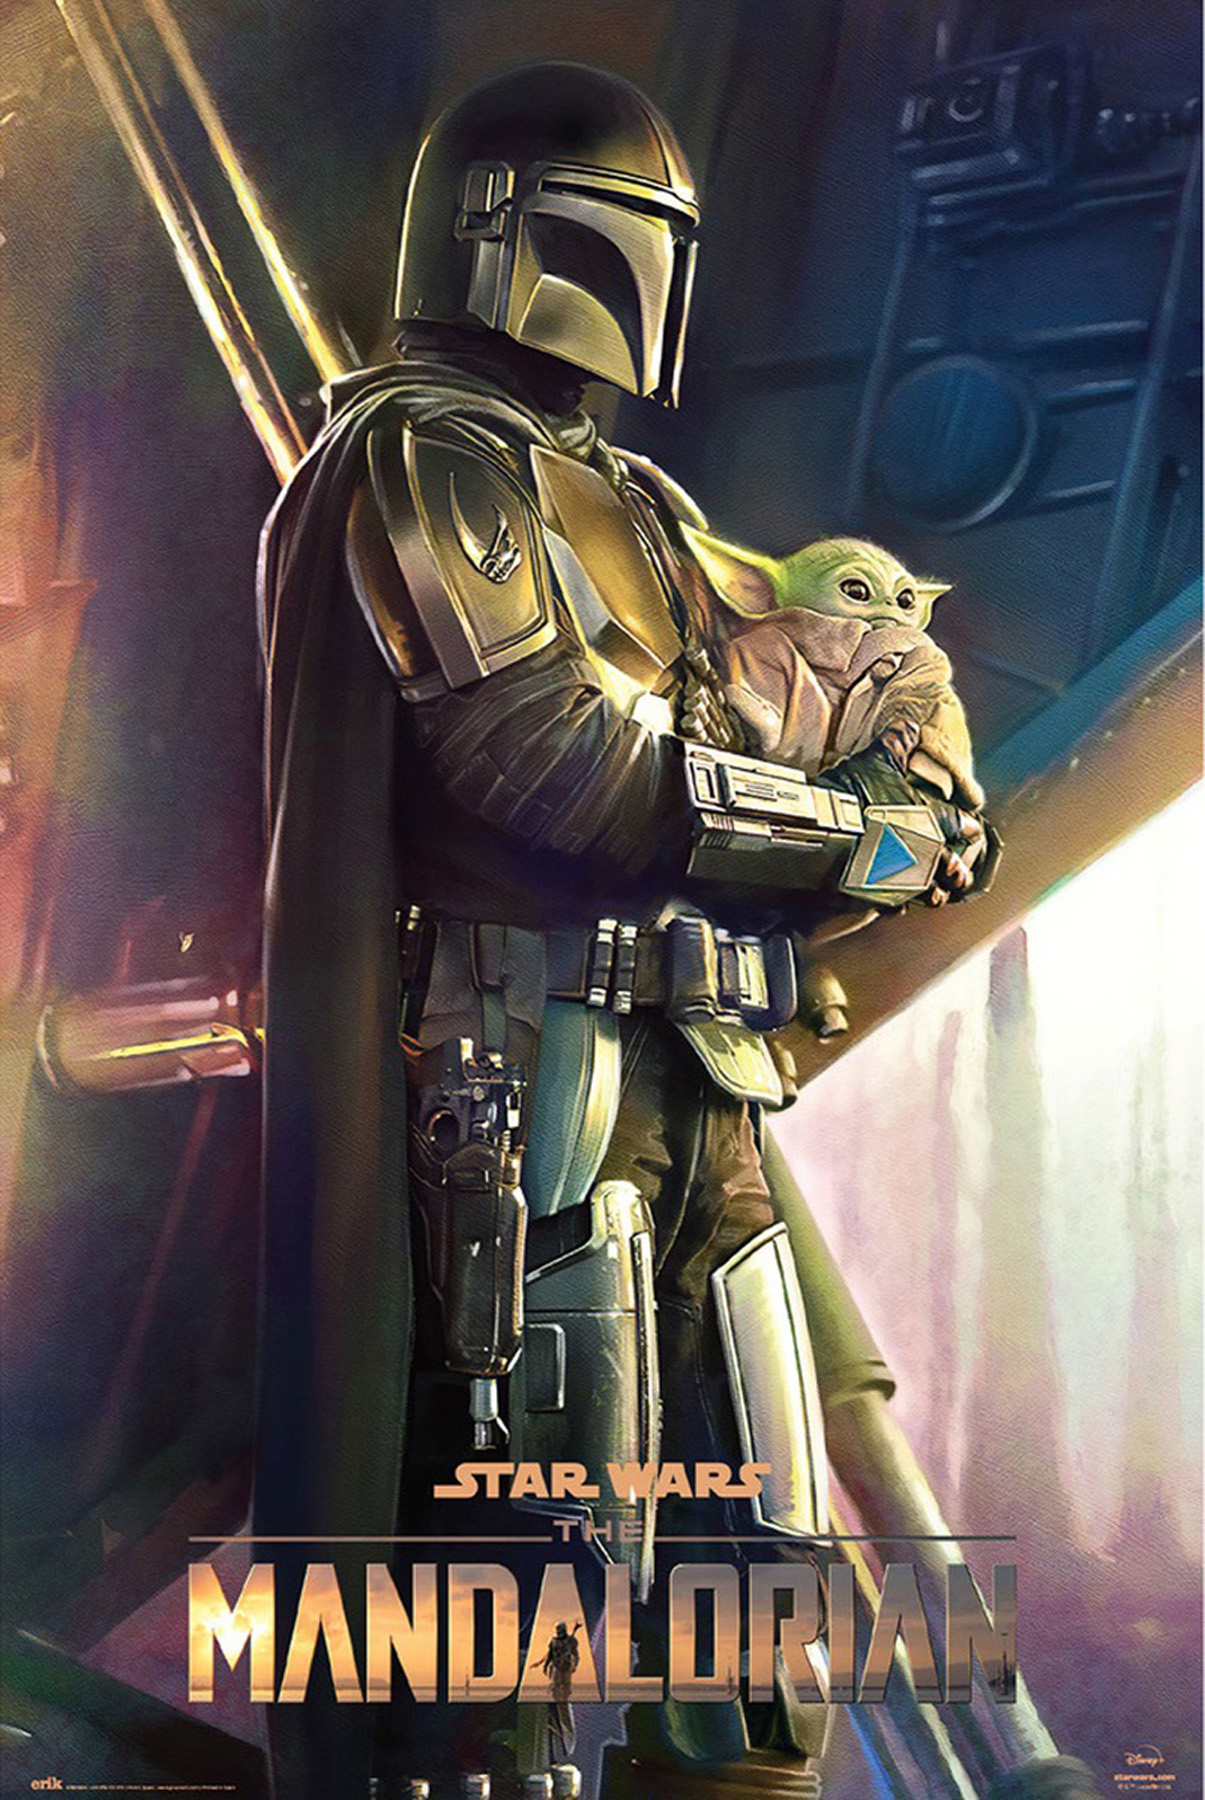 - Clan - The Star Wars Mandalorian two of